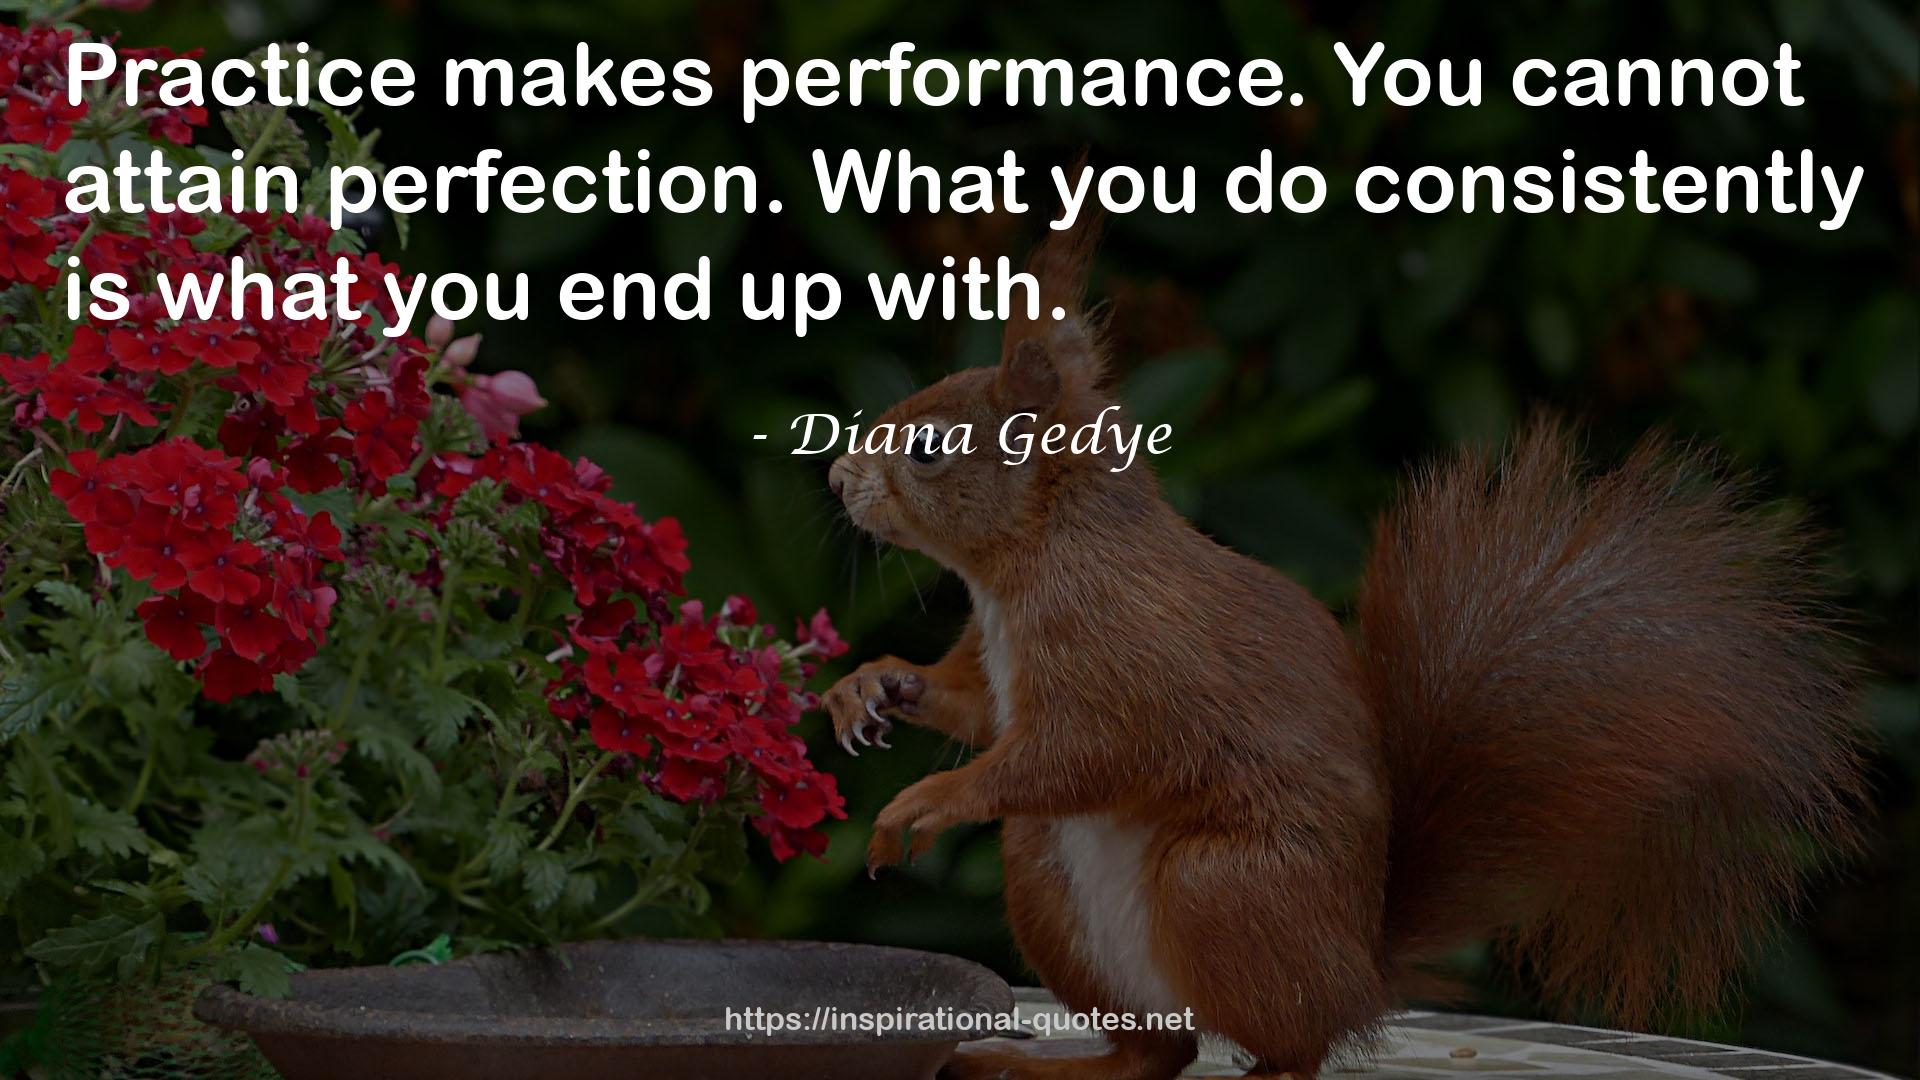 Diana Gedye QUOTES